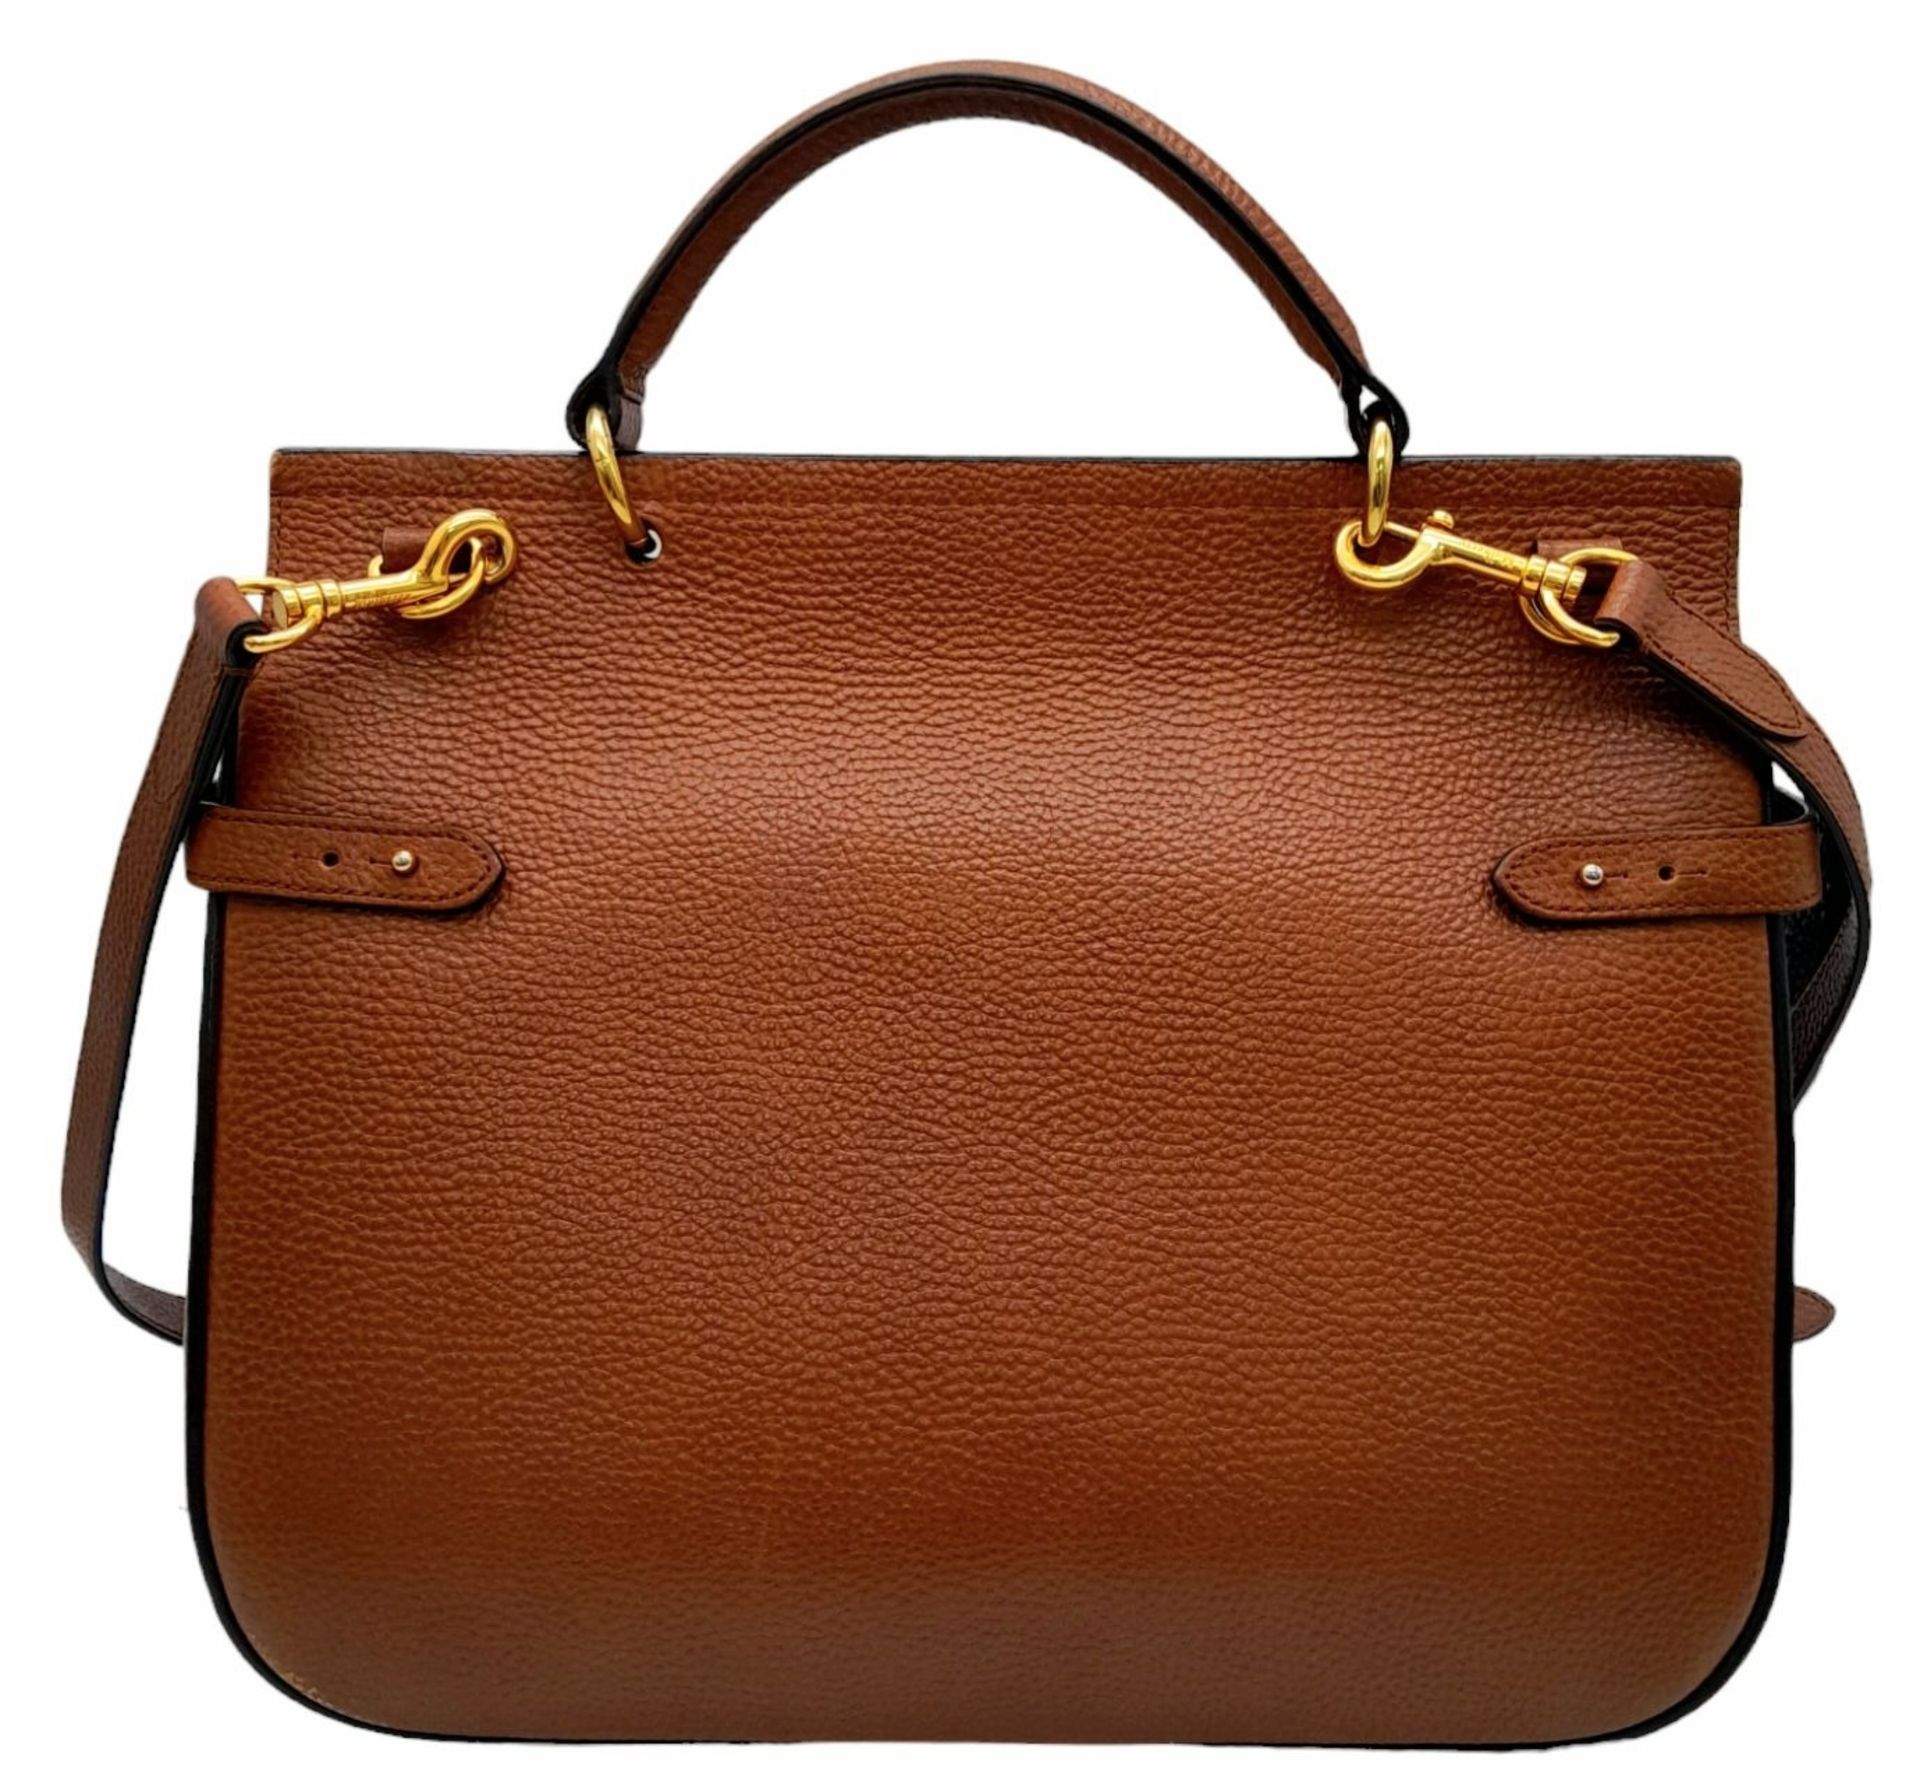 A Mulberry Amberley Satchel Handbag. Brown leather exterior with gold tone hardware. Flap-over front - Bild 2 aus 14